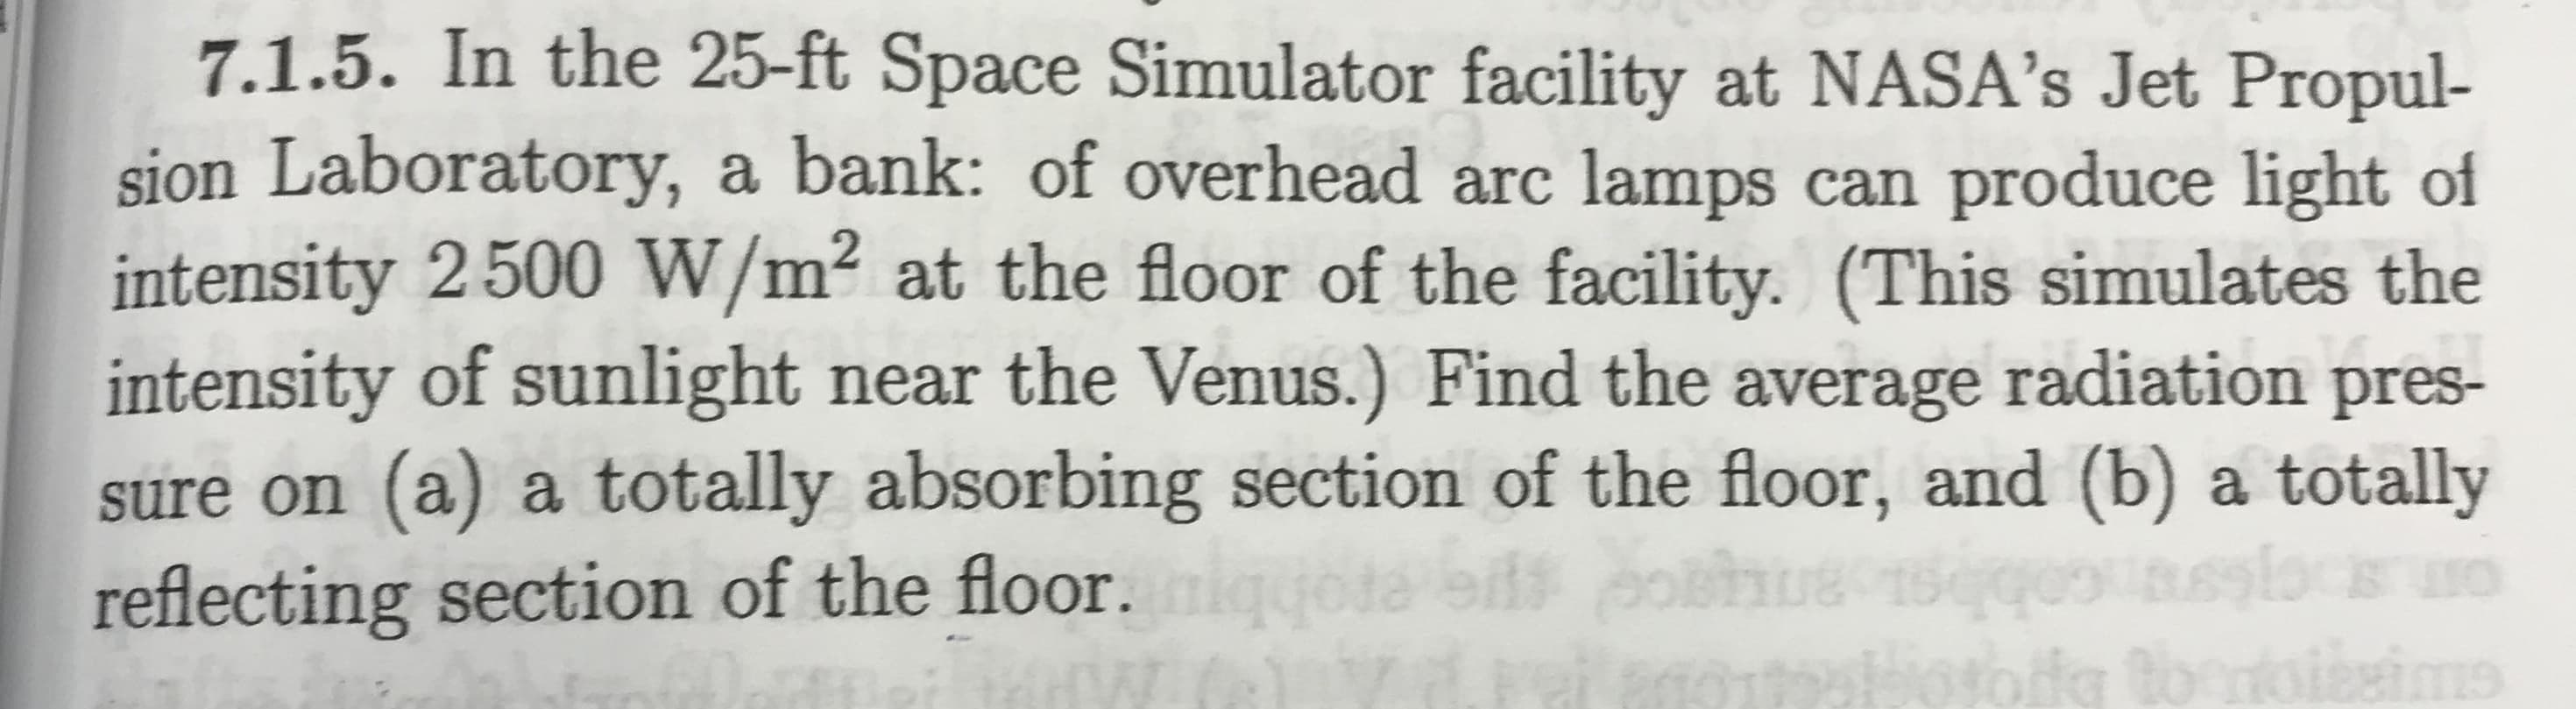 7.1.5. In the 25-ft Space Simulator facility at NASA's Jet Propul-
sion Laboratory, a bank: of overhead arc lamps can produce light of
intensity 2500 W/m² at the floor of the facility. (This simulates the
intensity of sunlight near the Venus.) Find the average radiation pres-
sure on (a) a totally absorbing section of the floor, and (b) a totally
reflecting section of the floor.ig
